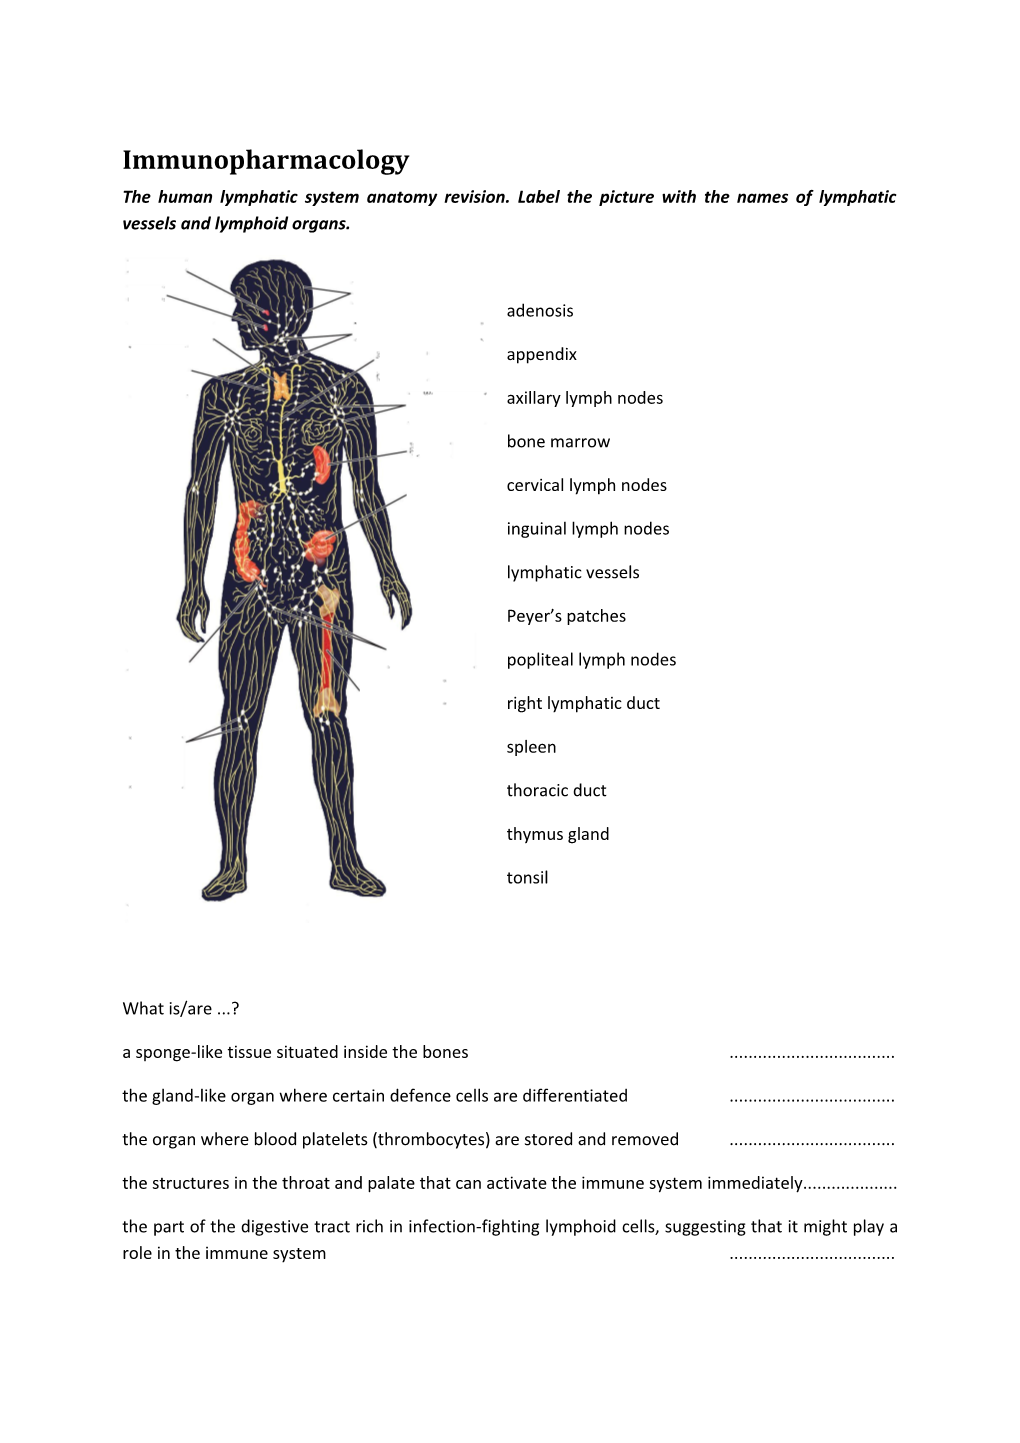 The Human Lymphatic System Anatomy Revision. Label the Picture with the Names of Lymphatic